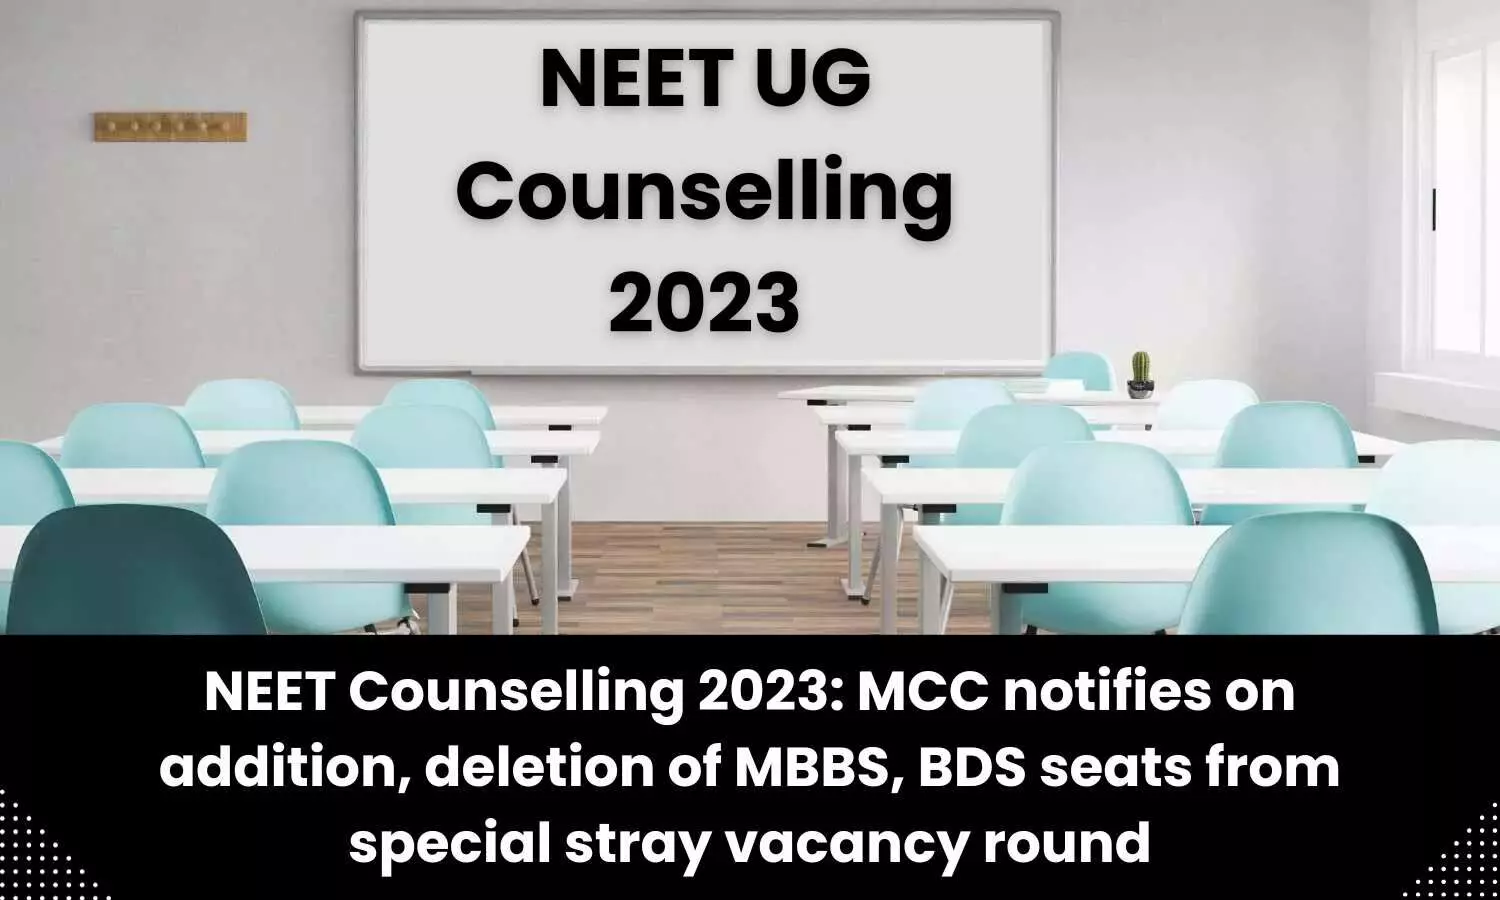 MCC notifies on addition, deletion of MBBS, BDS seats from special stray vacancy round of NEET Counselling 2023